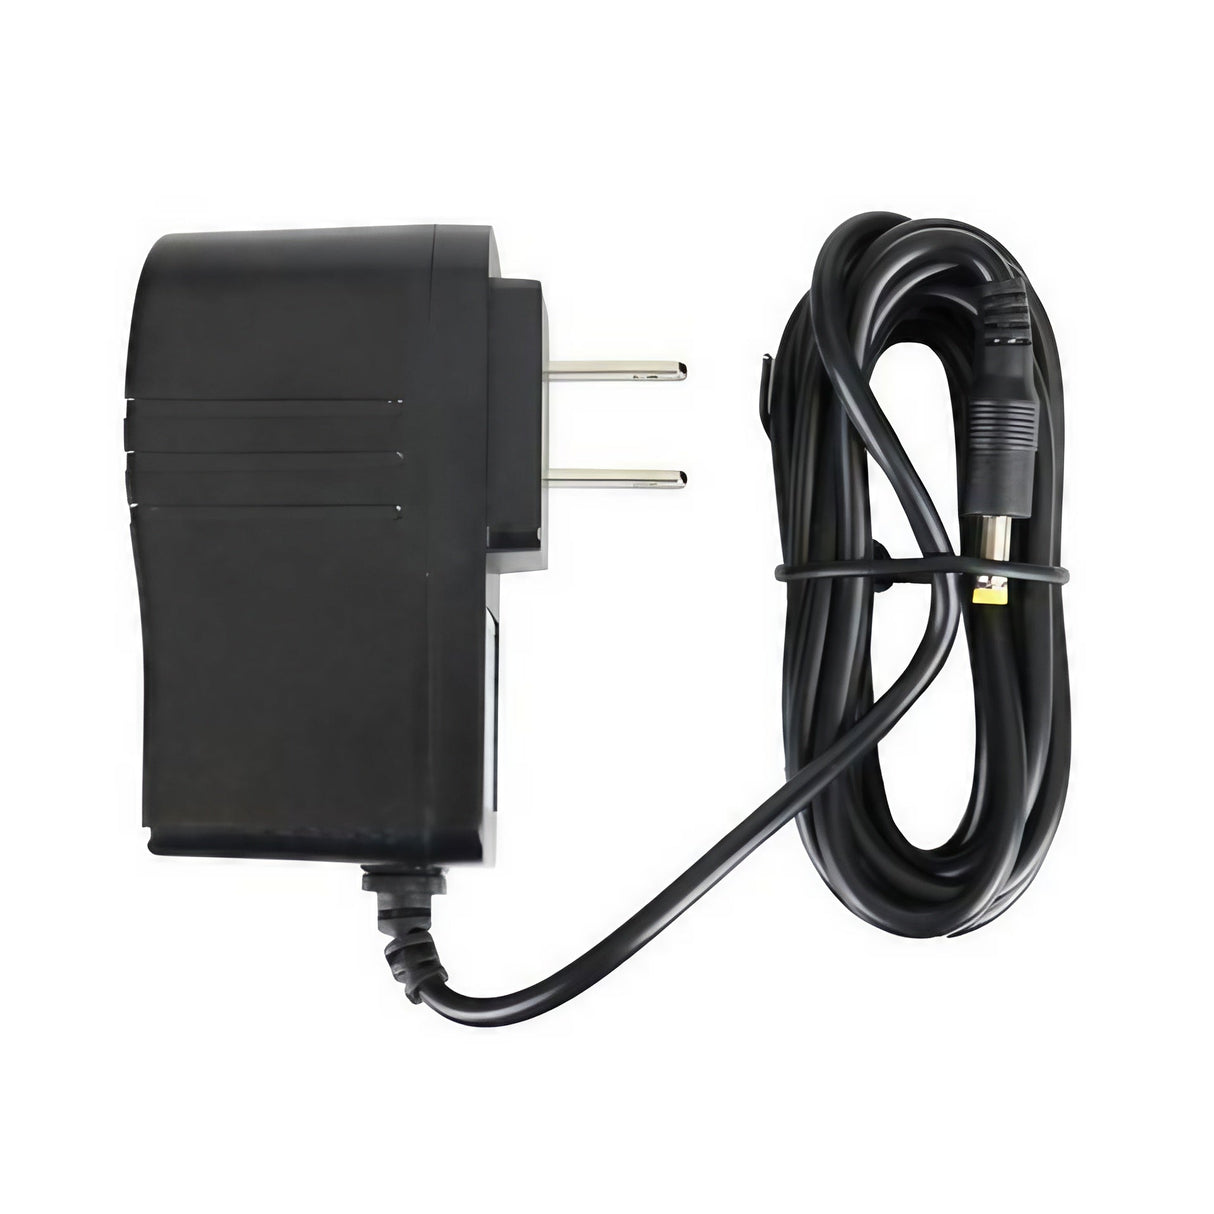 Arizer Solo2 Wall Charger in black, compact design, for vaporizers, front view on white background